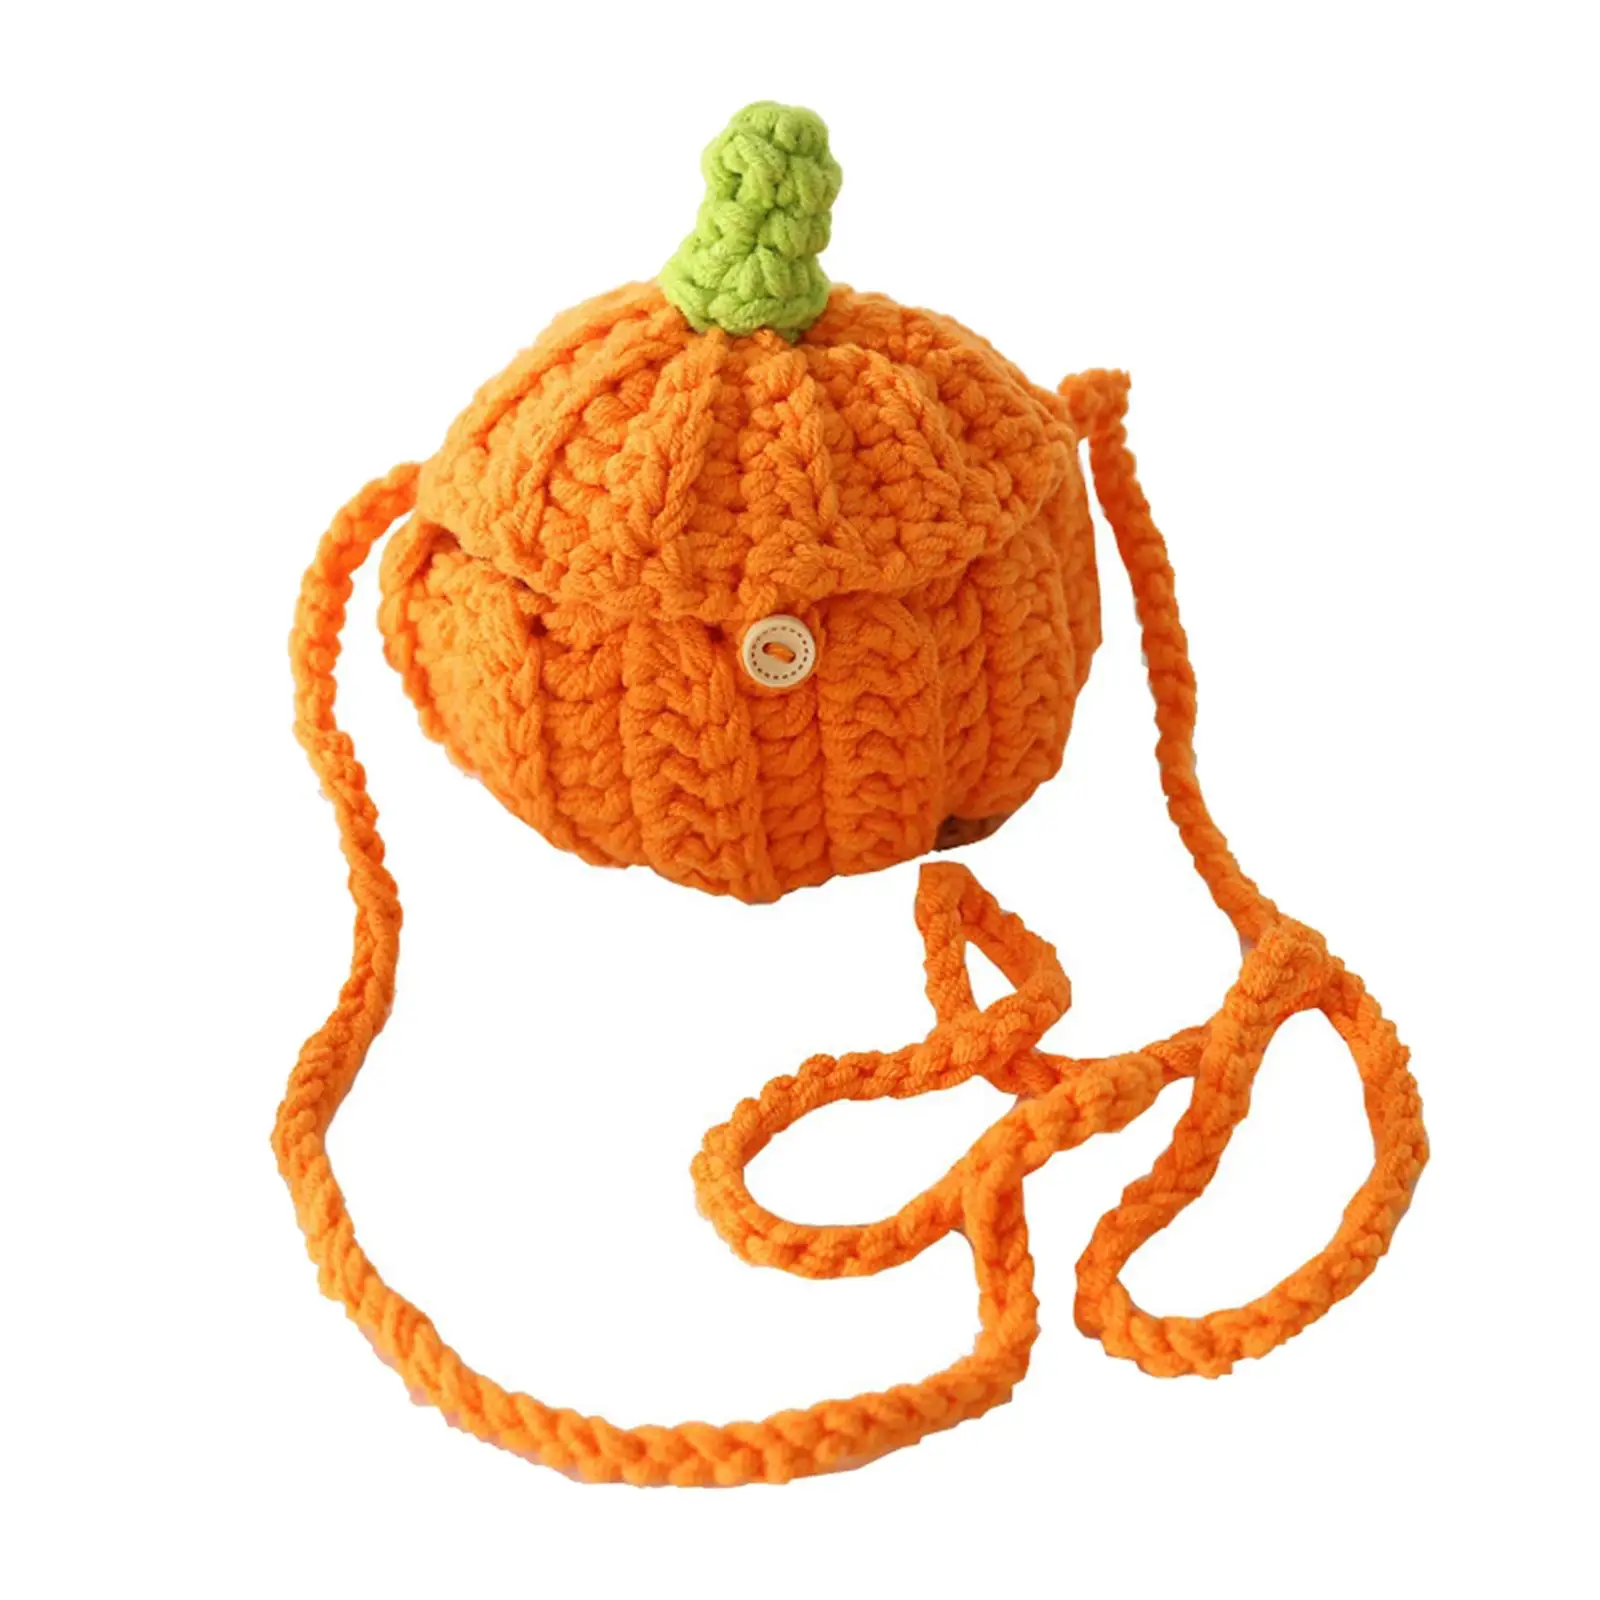 Pumpkin Crossbody Bag Portable Novelty Adorable Tote Coin Purse for Travel Shopping Costume Party Thanksgiving Stage Performance